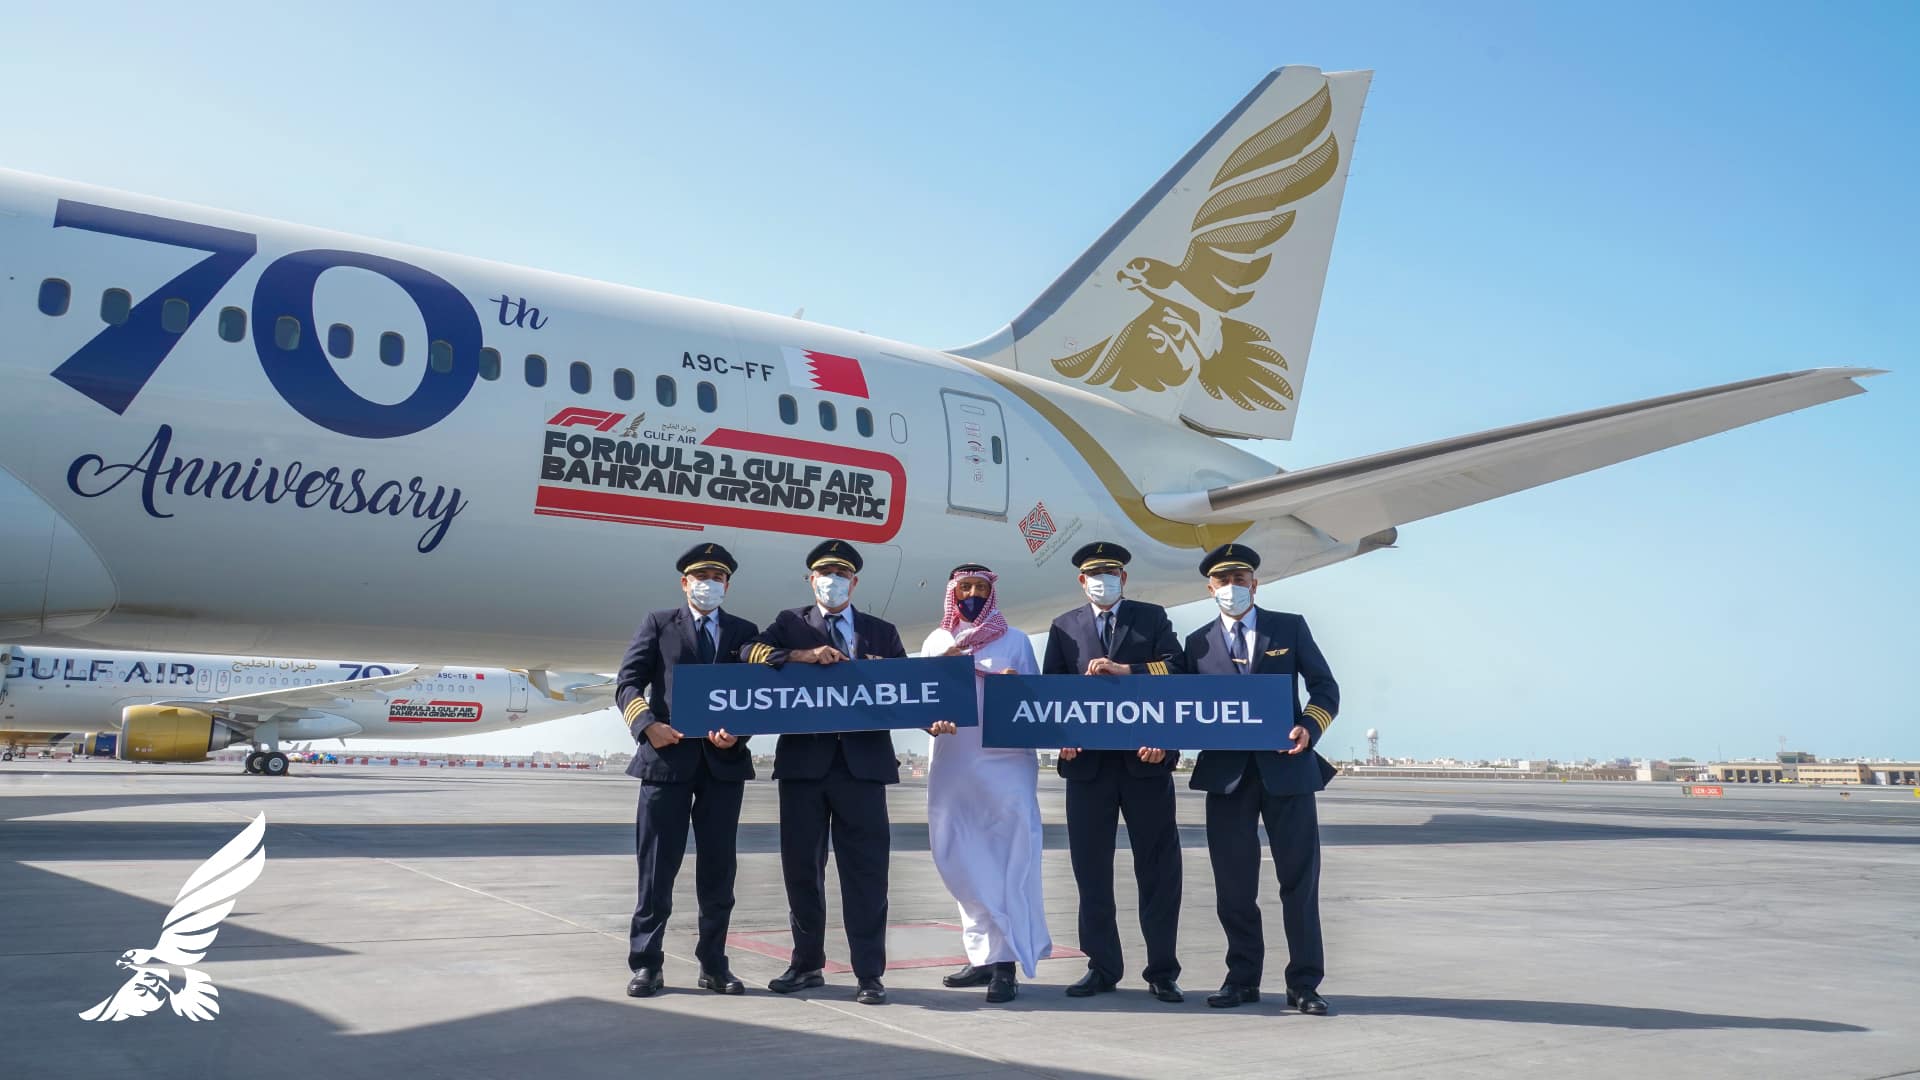 Gulf Air to Perform Lower Emission Flypast at Tonight’s Bahrain Grand Prix